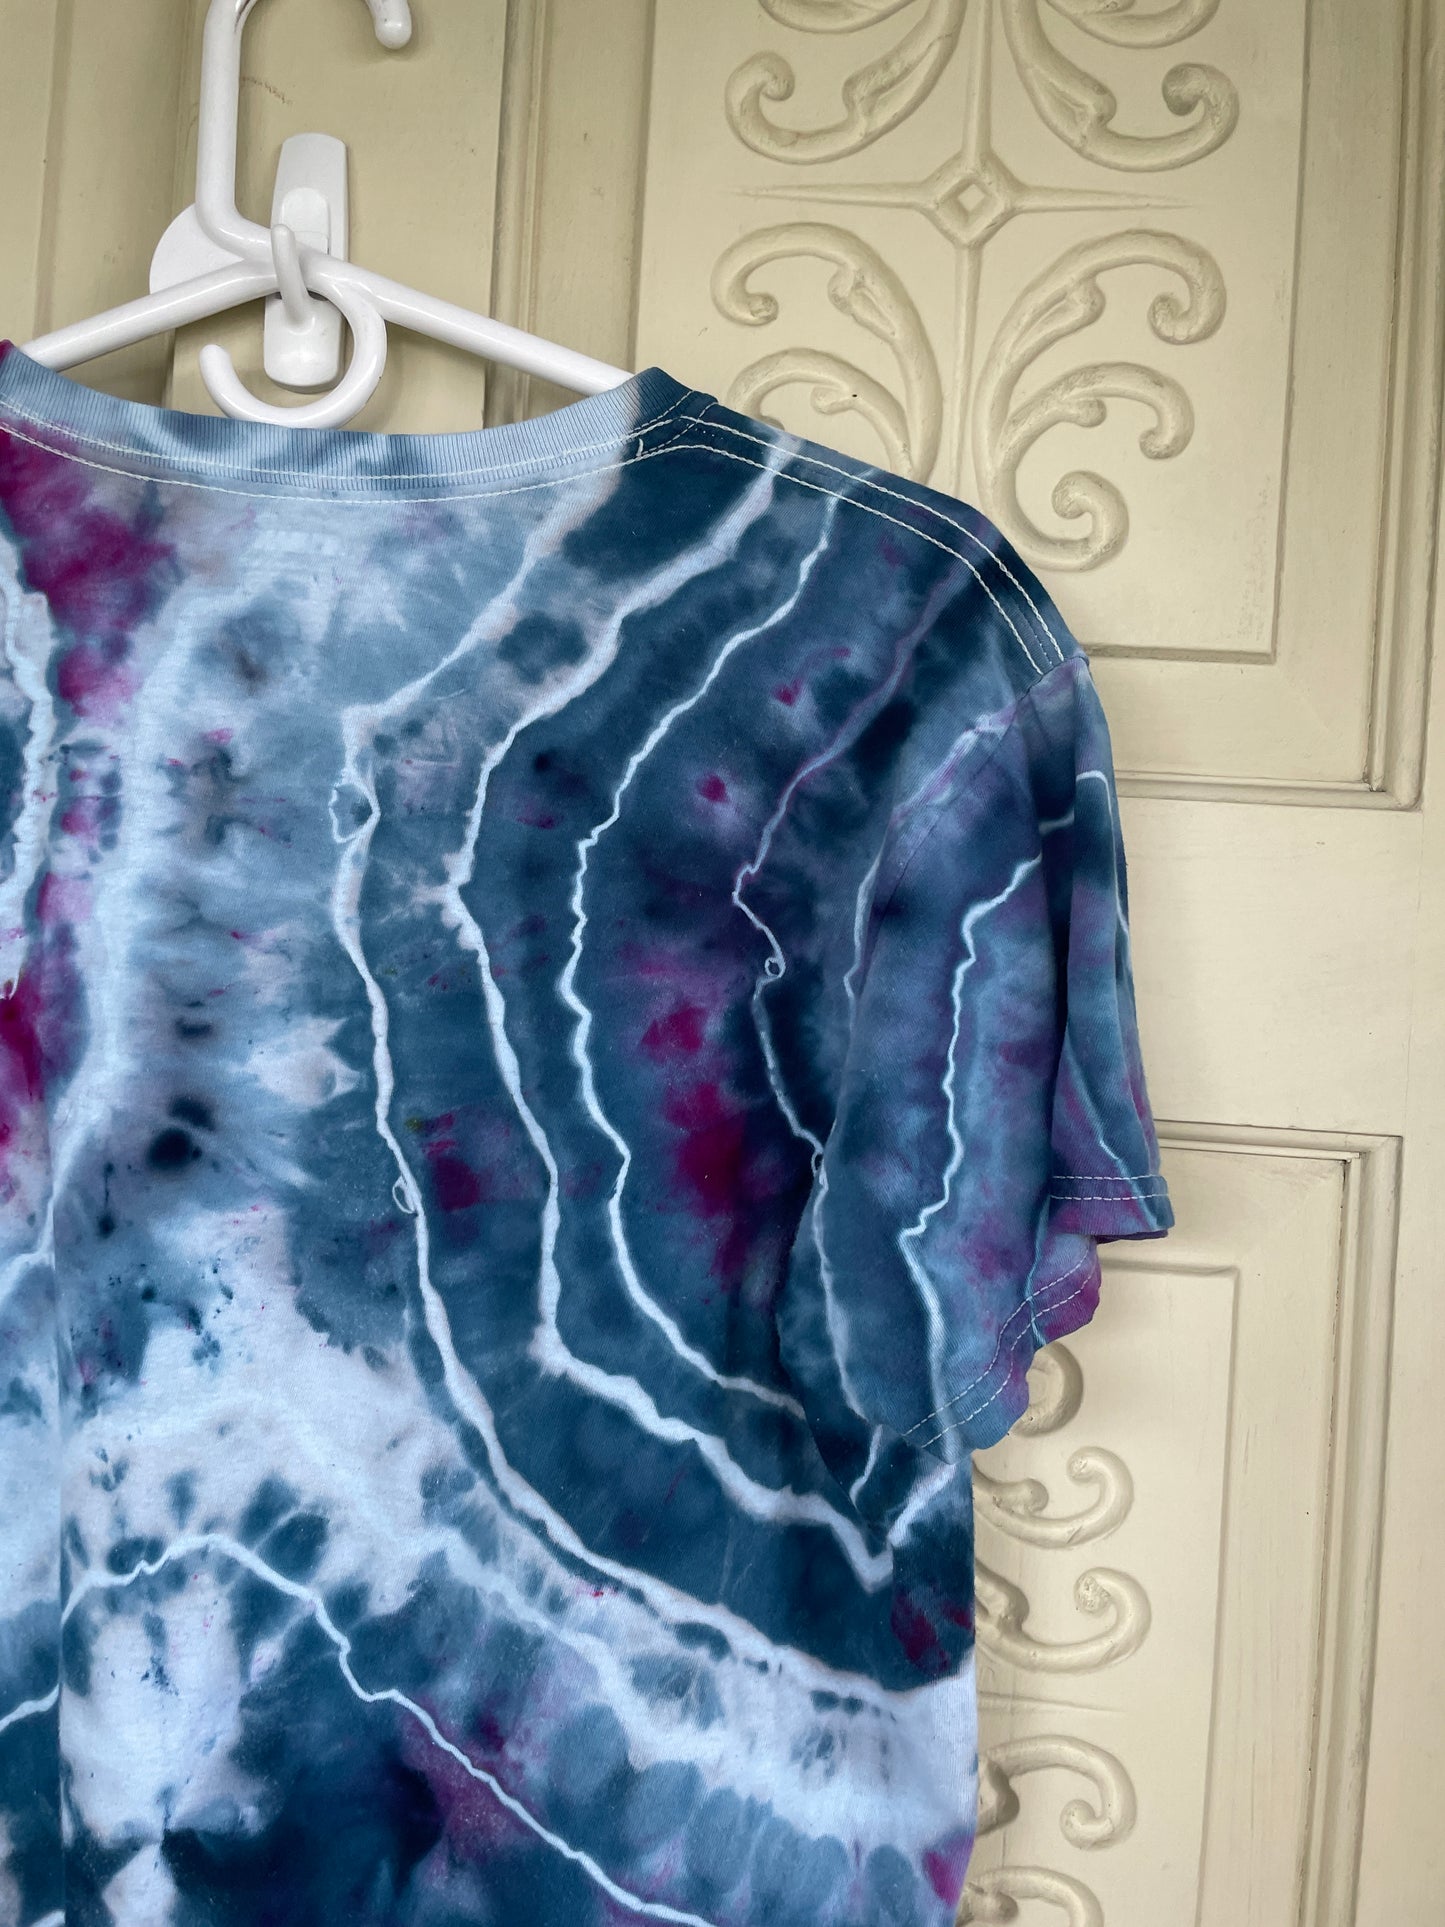 Medium Men's Groovy Alien Handmade Galaxy Geode Tie Dye T-Shirt | One-Of-a-Kind Upcycled Blue and White Short Sleeve Shirt